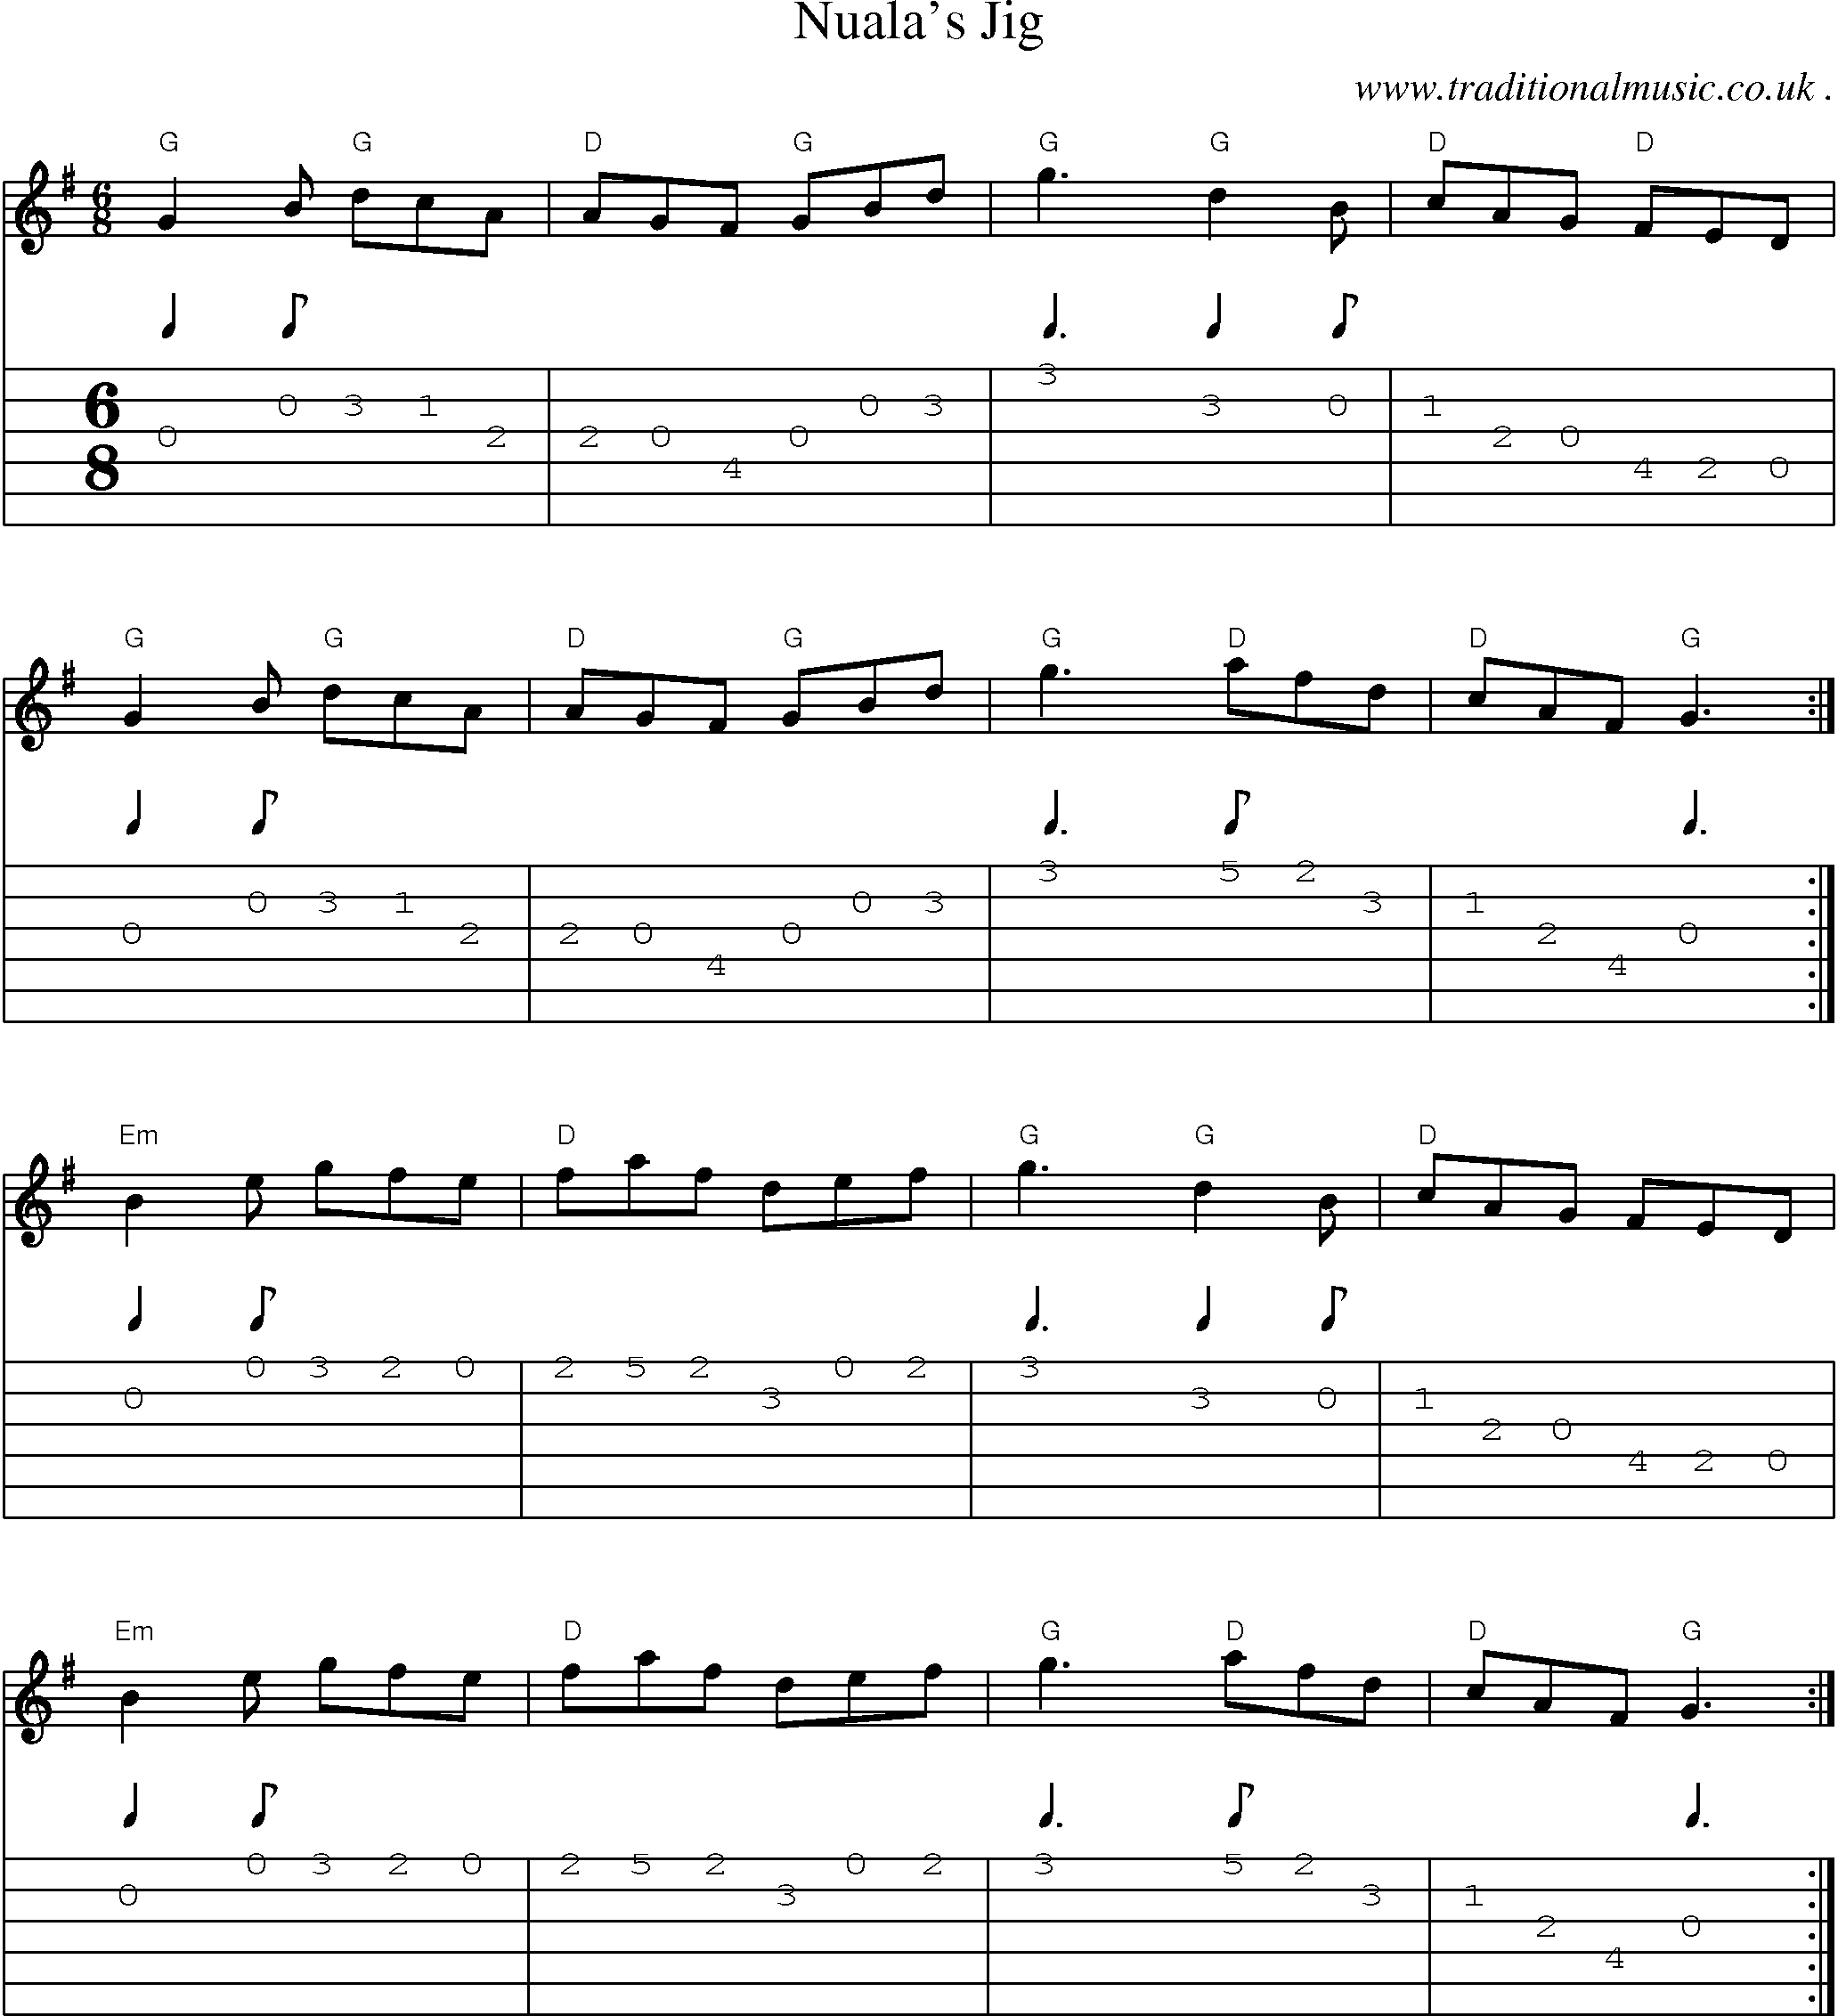 Sheet-music  score, Chords and Guitar Tabs for Nualas Jig